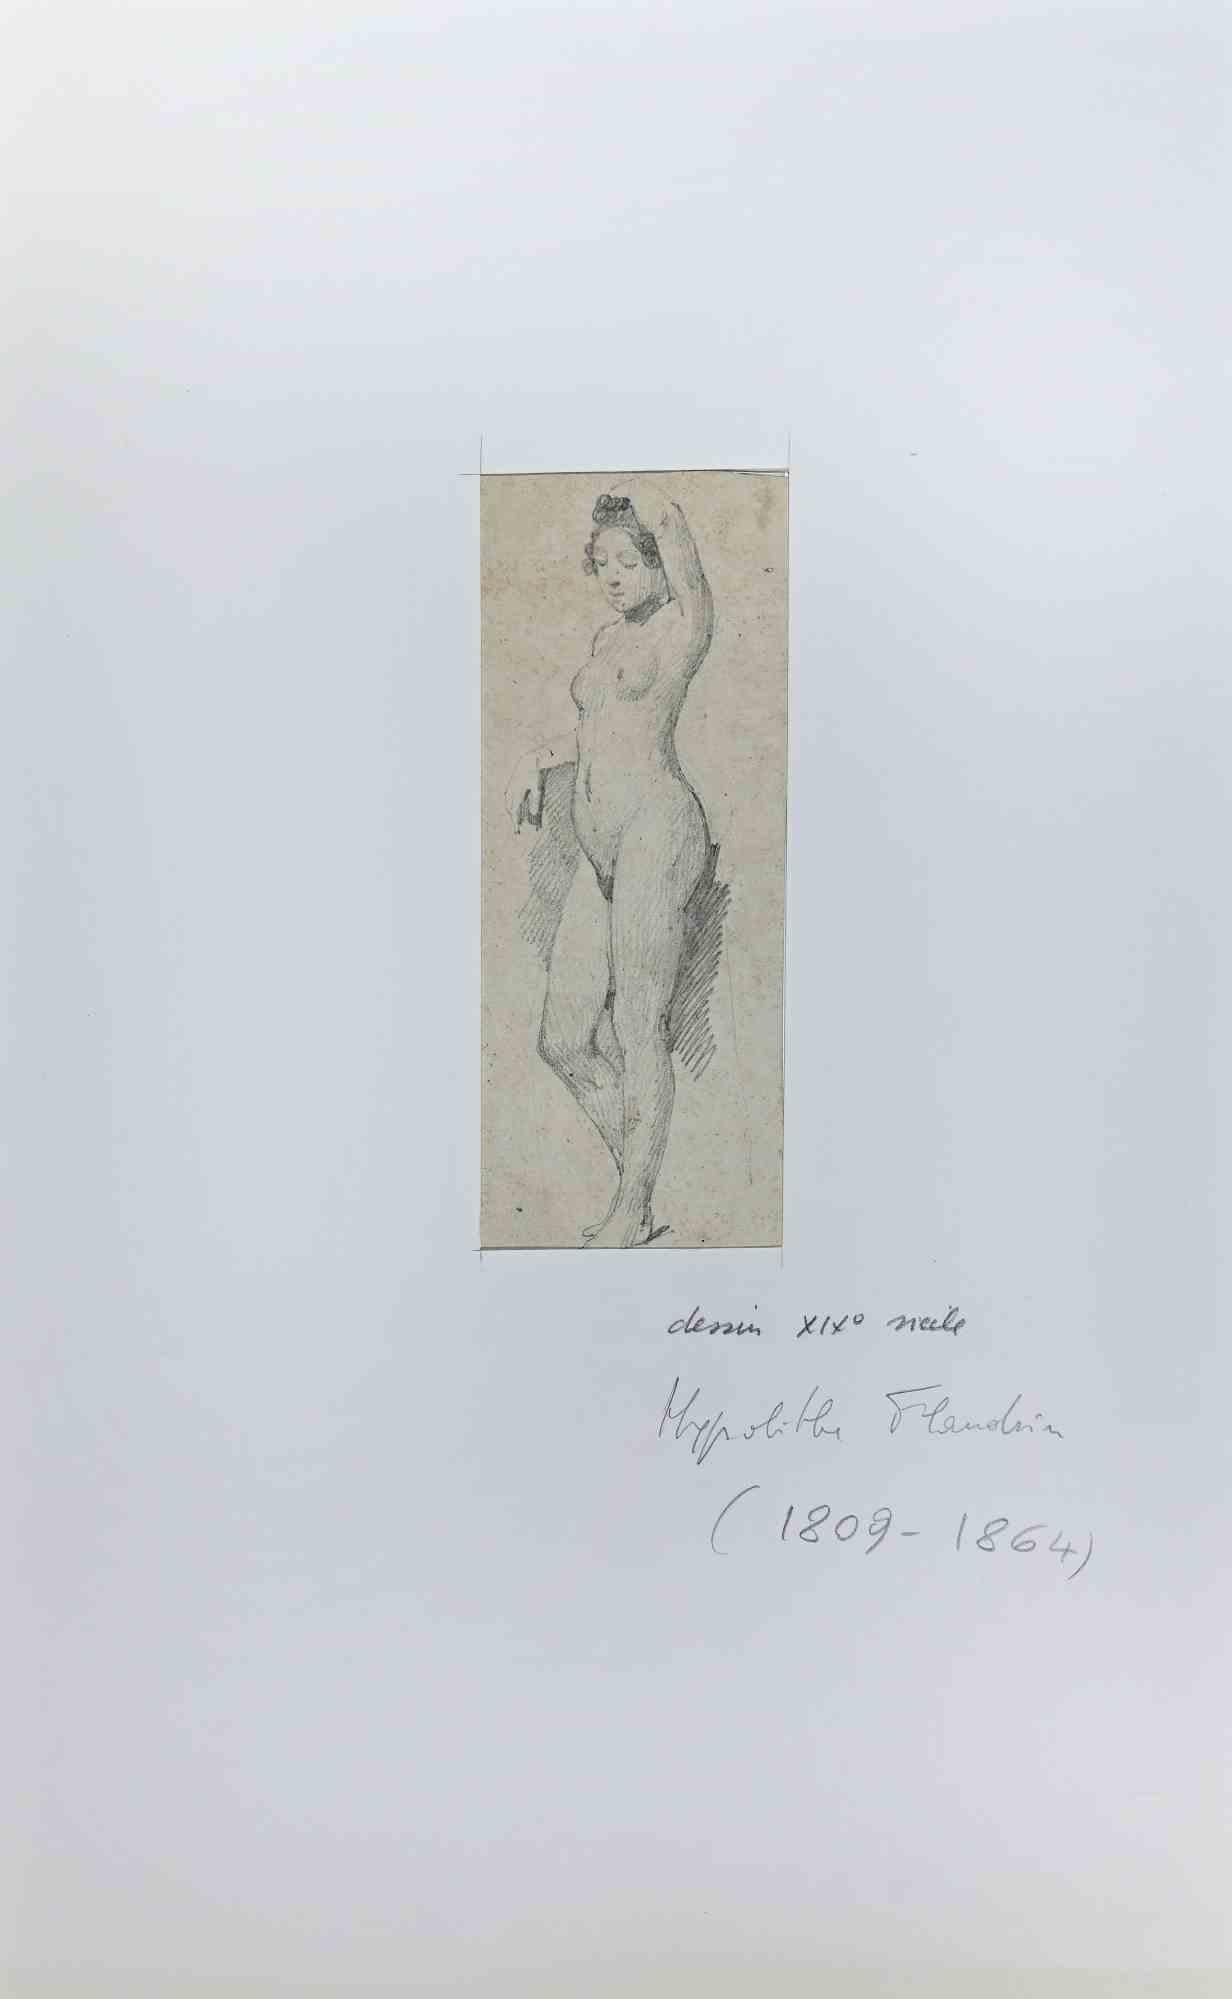 Nude of Woman is an Original Pencil Drawing realized by Jean-Hyppolyte Flandrin.

The little artwork is in good condition on a yellowed paper.

Signature by pencil on the back of the drawing, included a white cardboard passpartout (34x21.5